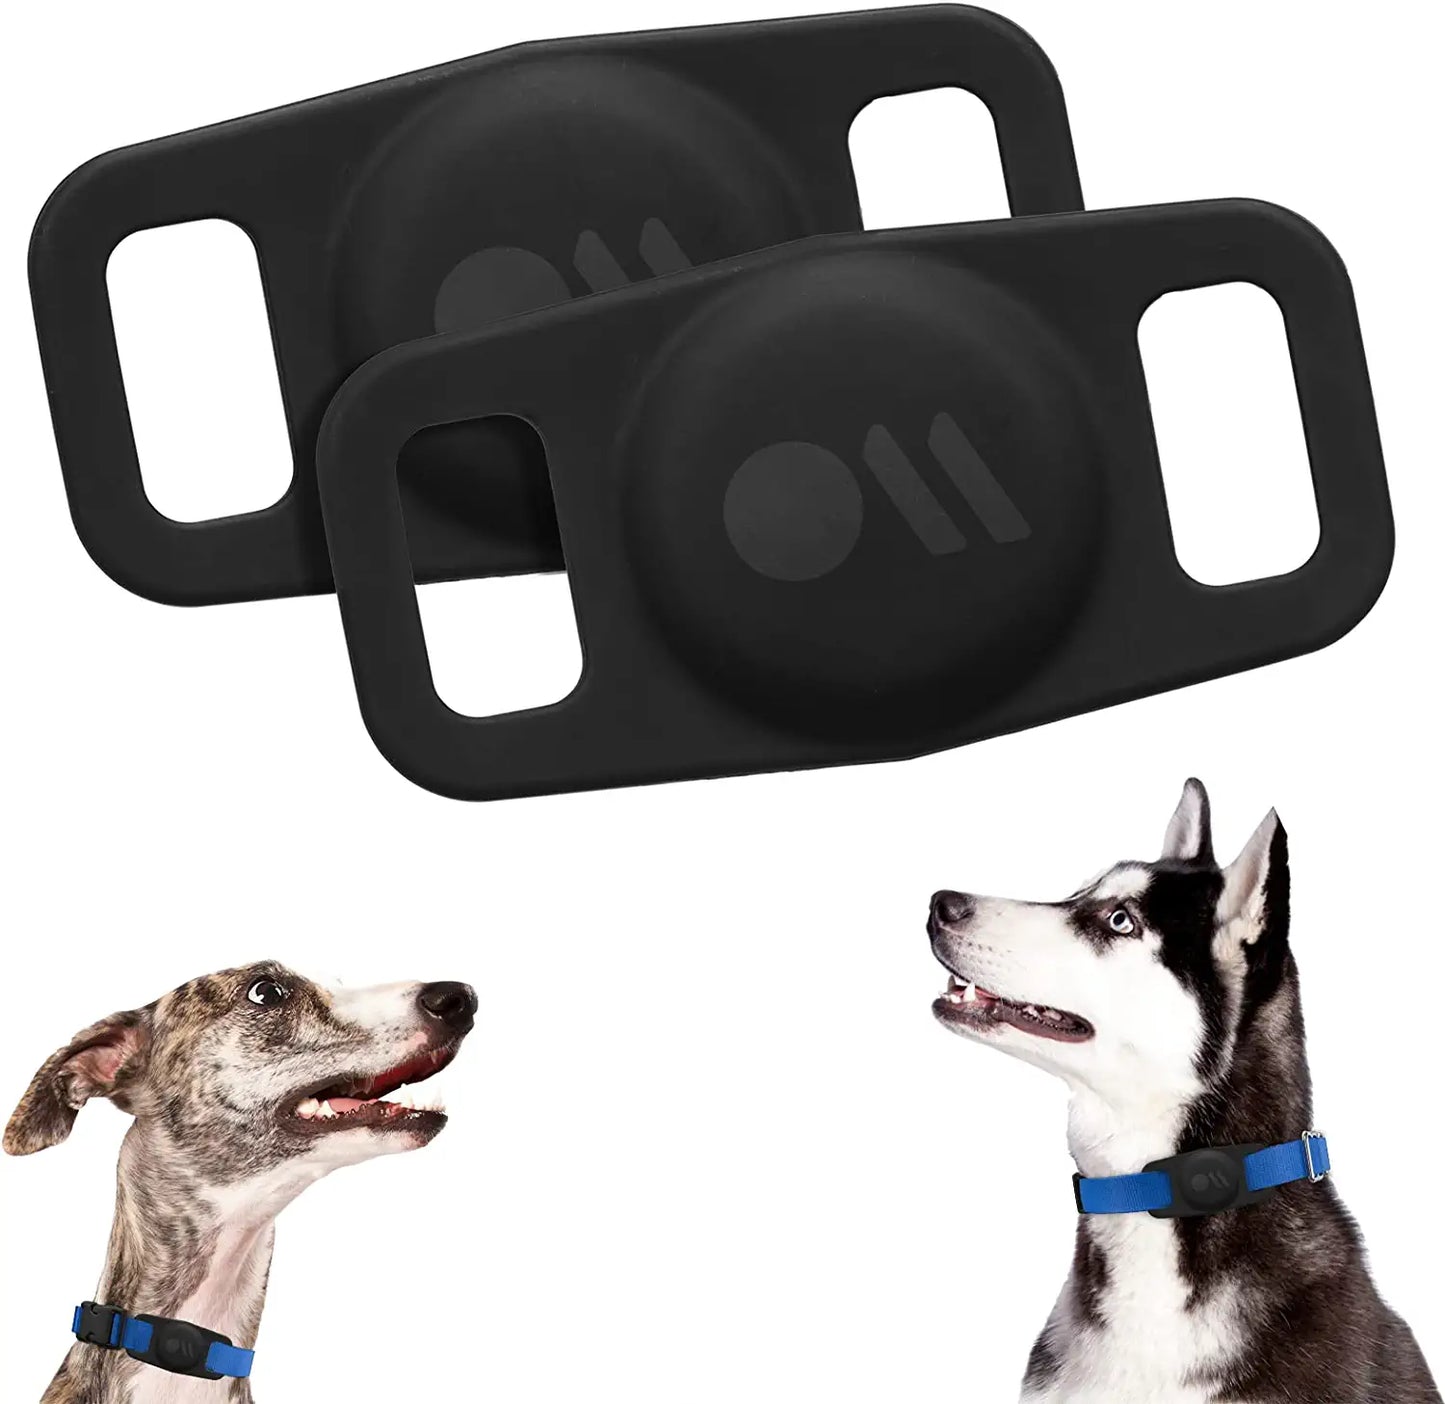 Case-Mate Protective Airtag Case for Dog Collar, Anti-Lost Airtag Loop for Dog GPS Tracker, Airtag Case Compatible with Cat/Dog Collar, (Black) Electronics > GPS Accessories > GPS Cases Case-Mate 2 Pack - Black  